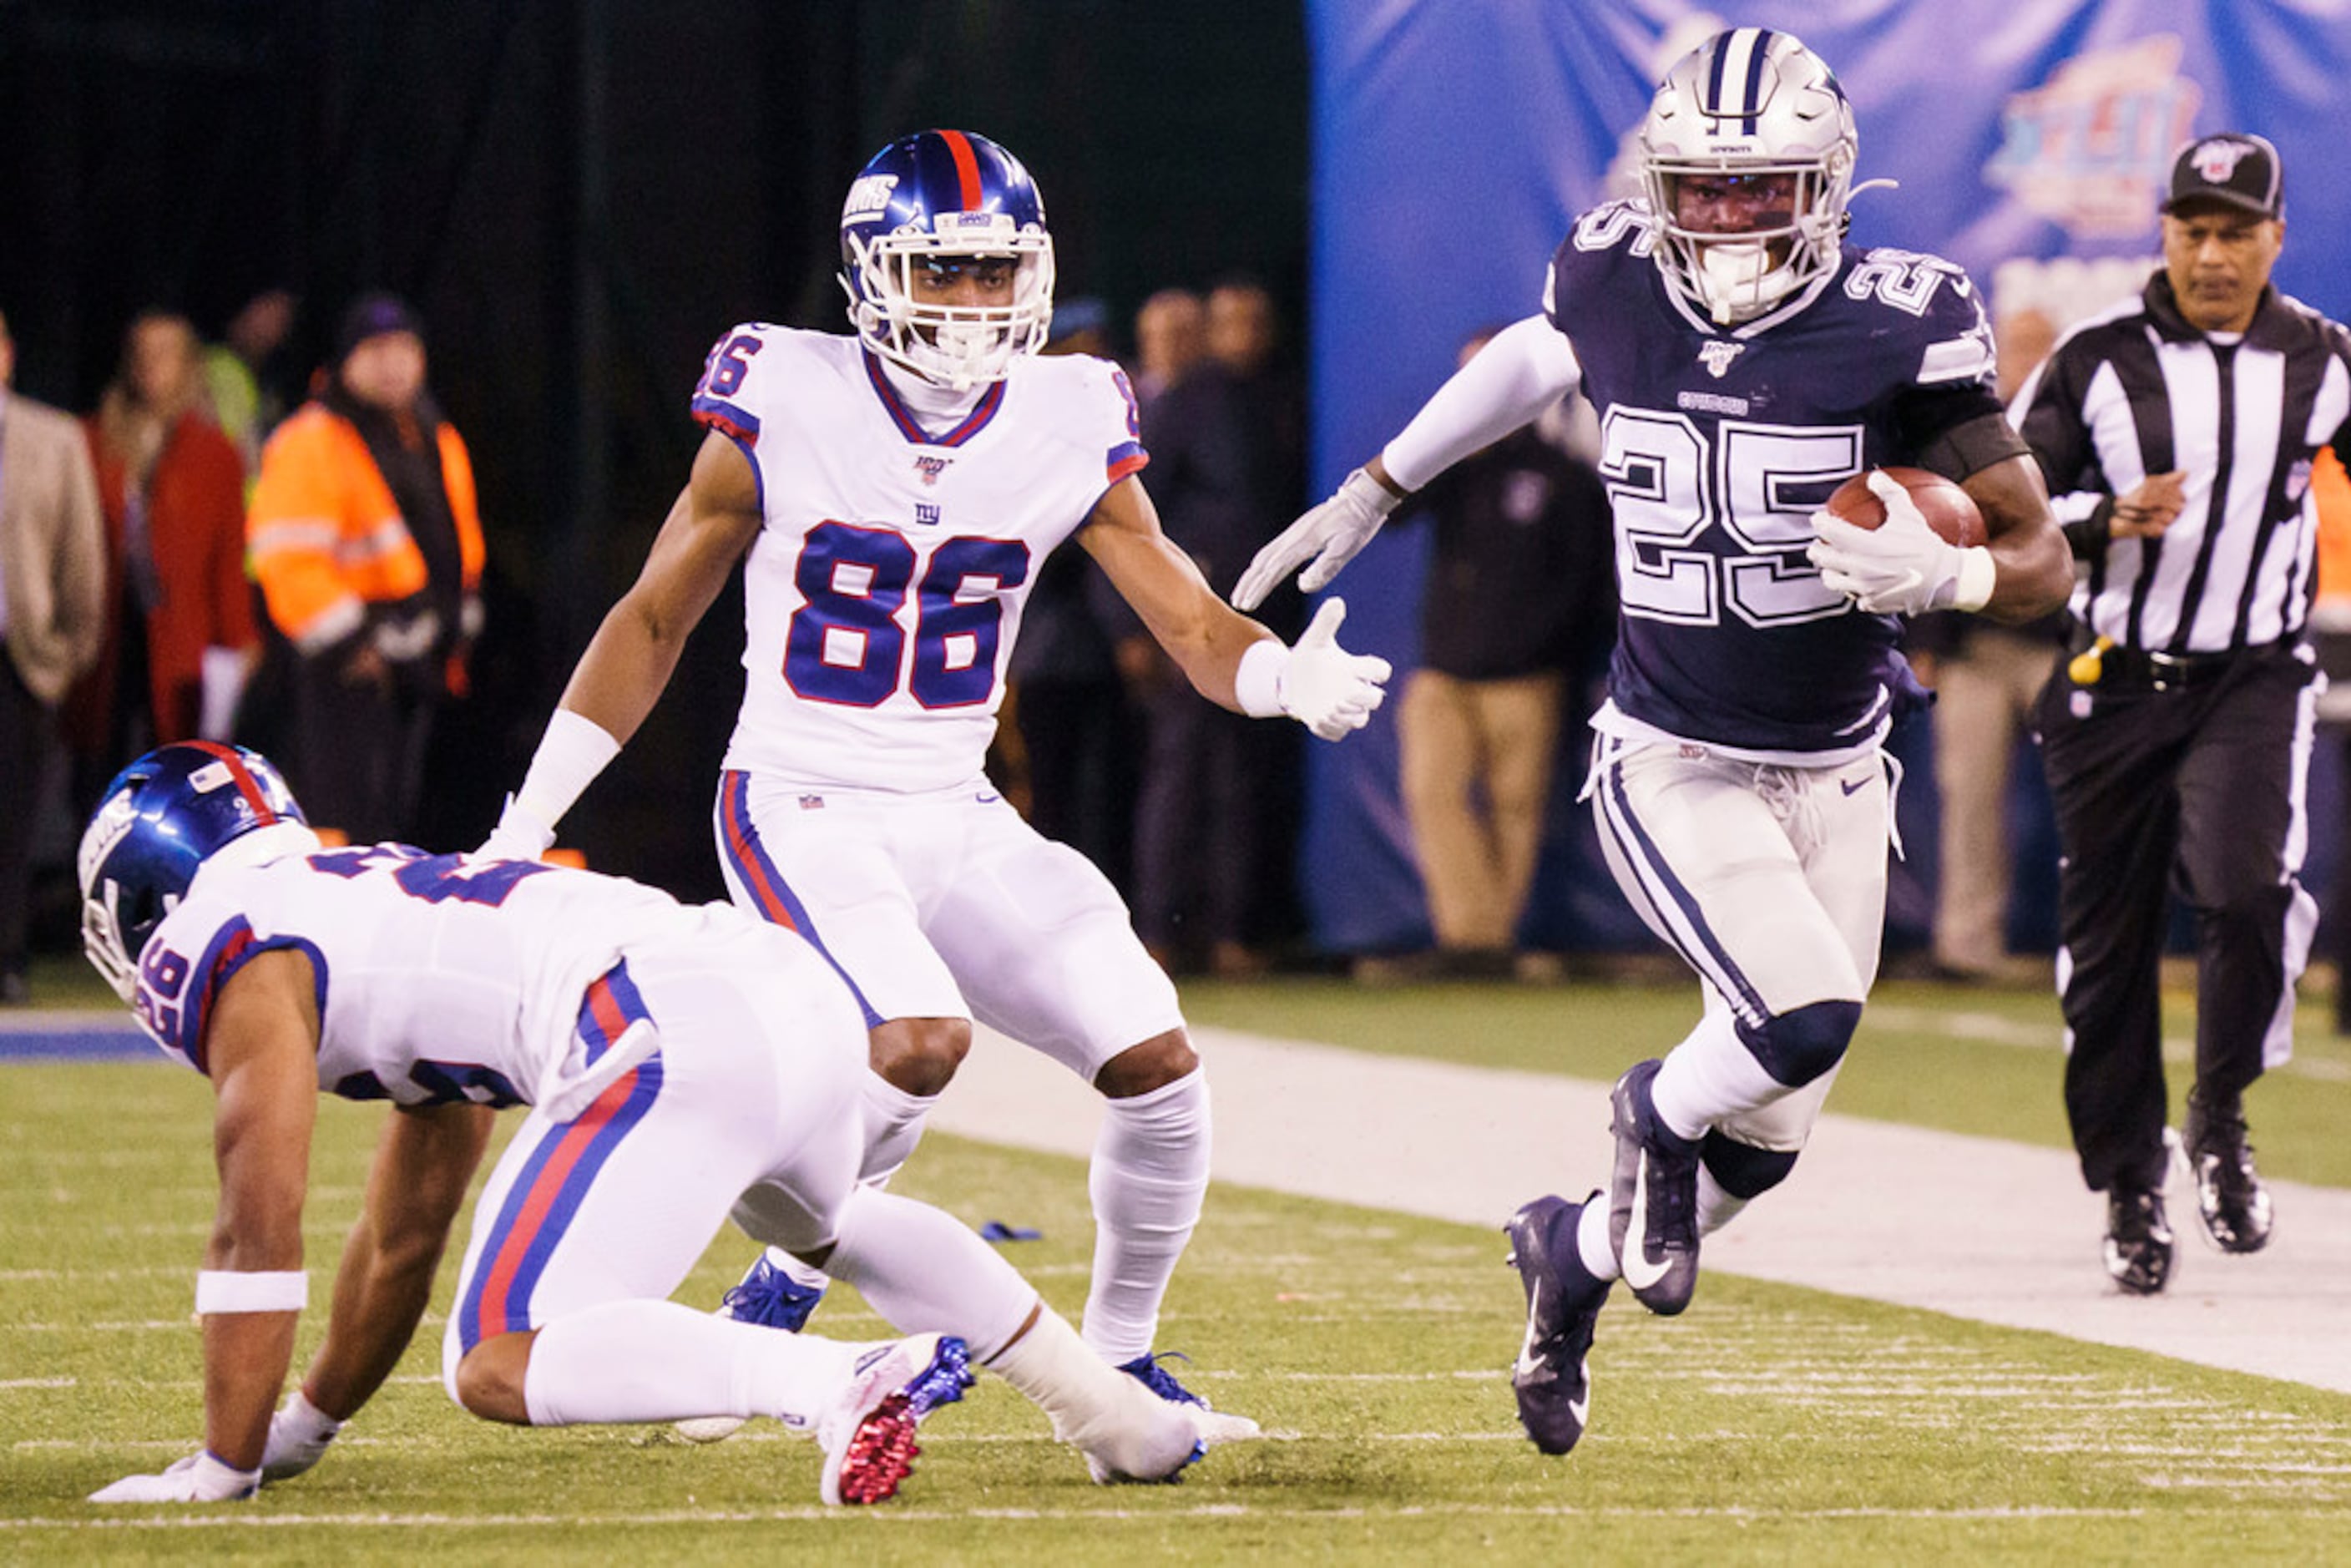 Dallas invades the Meadowlands! Check out our best photos from the Cowboys'  win over the Giants